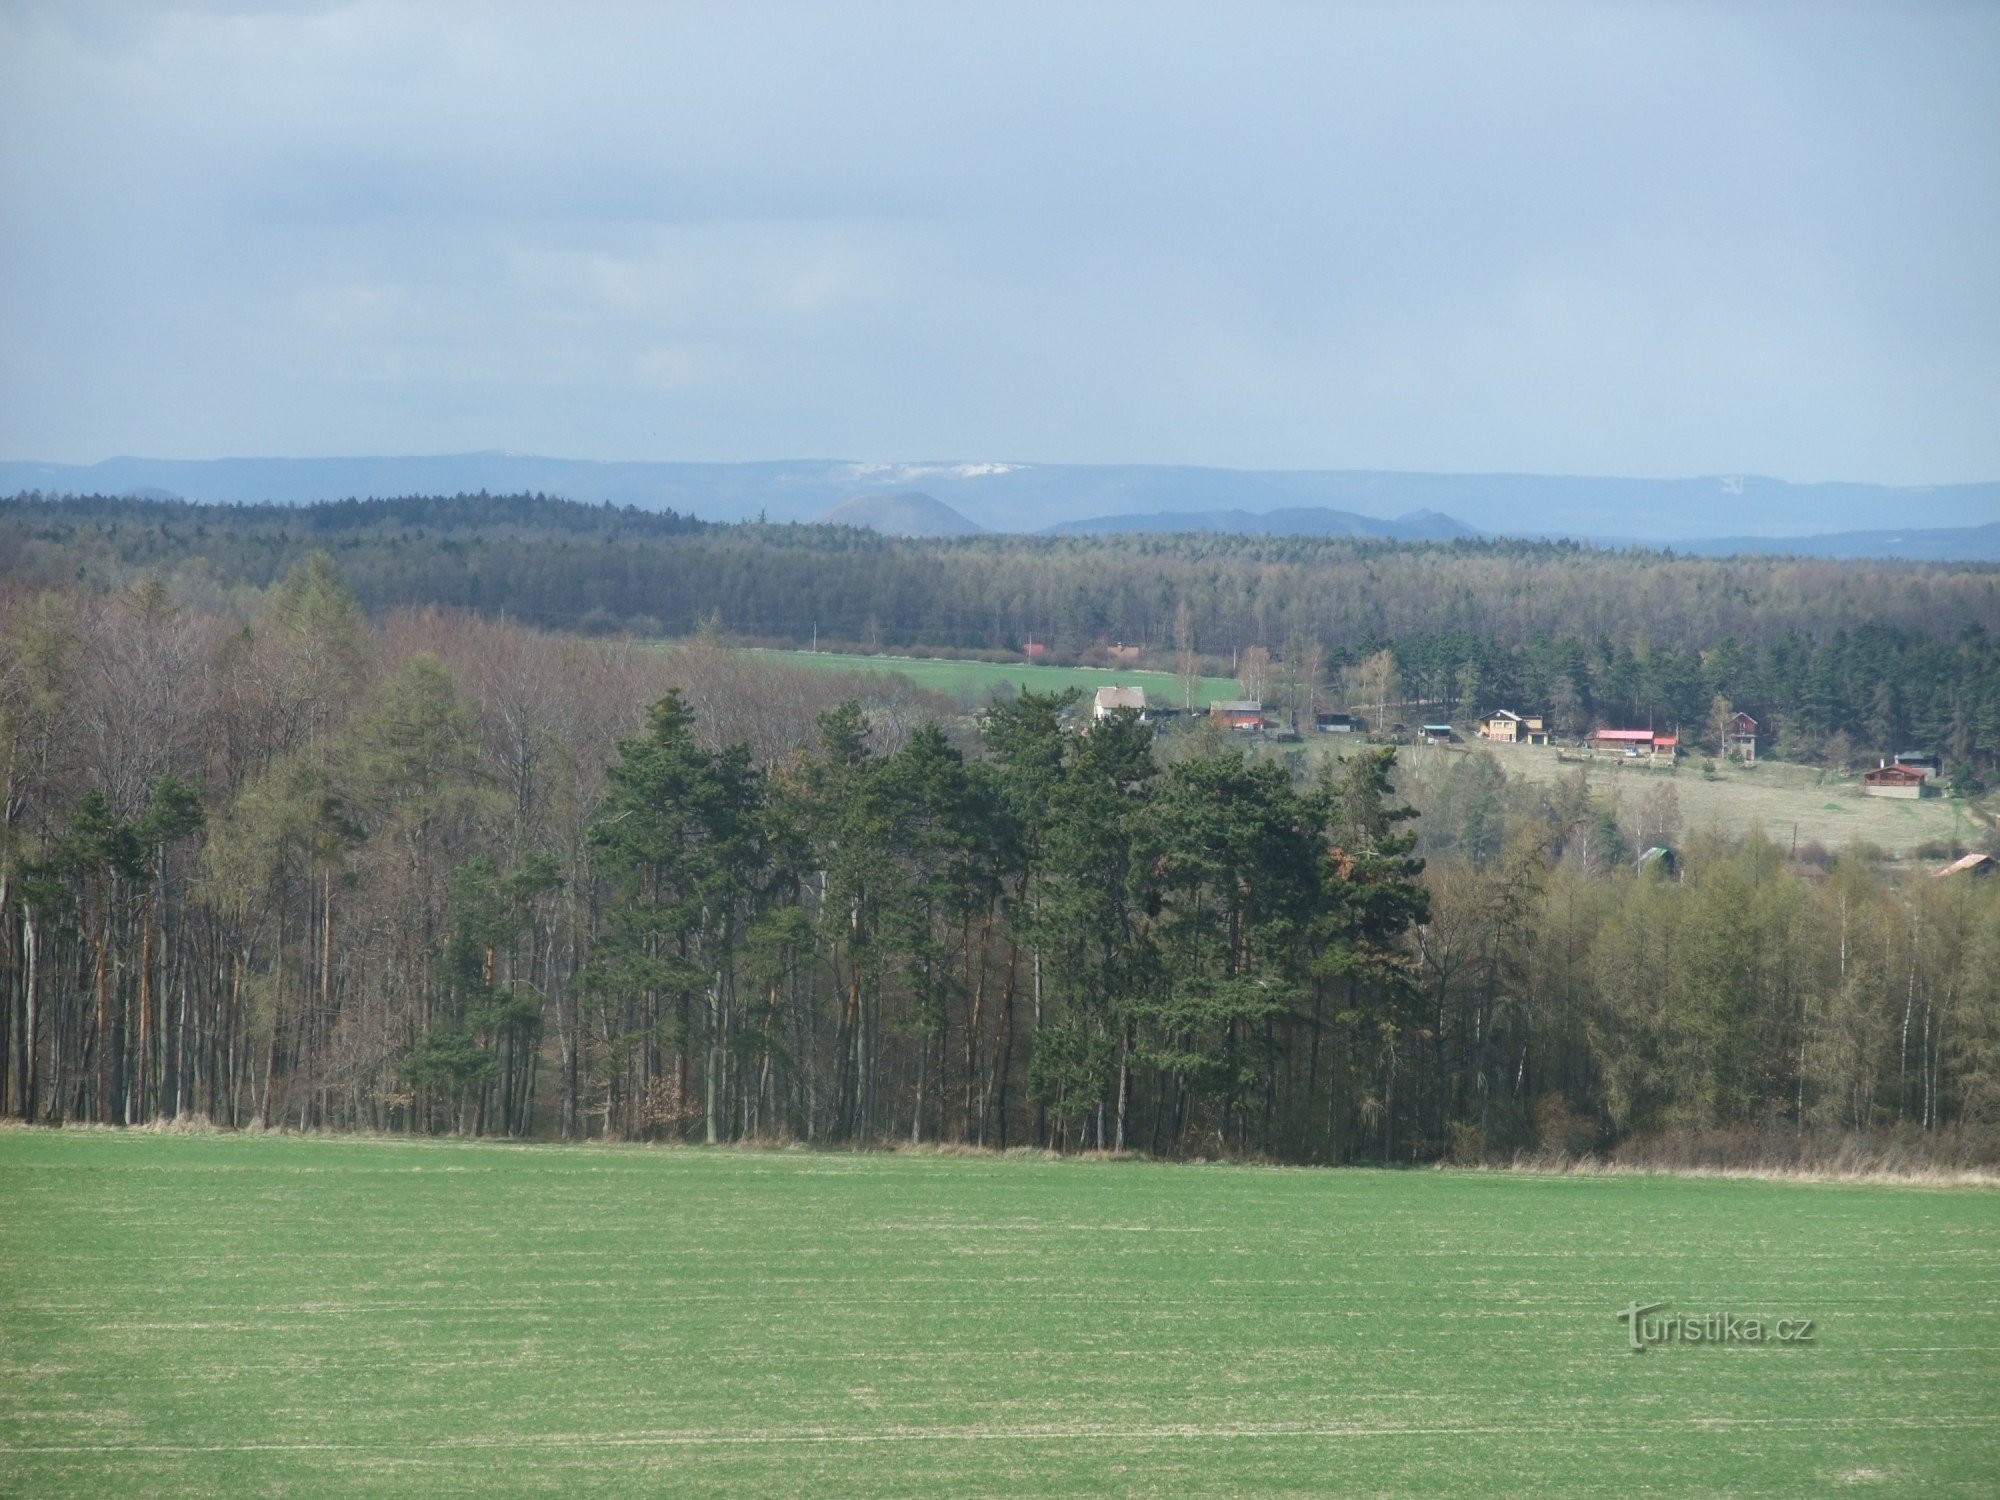 View of the Ore Mountains